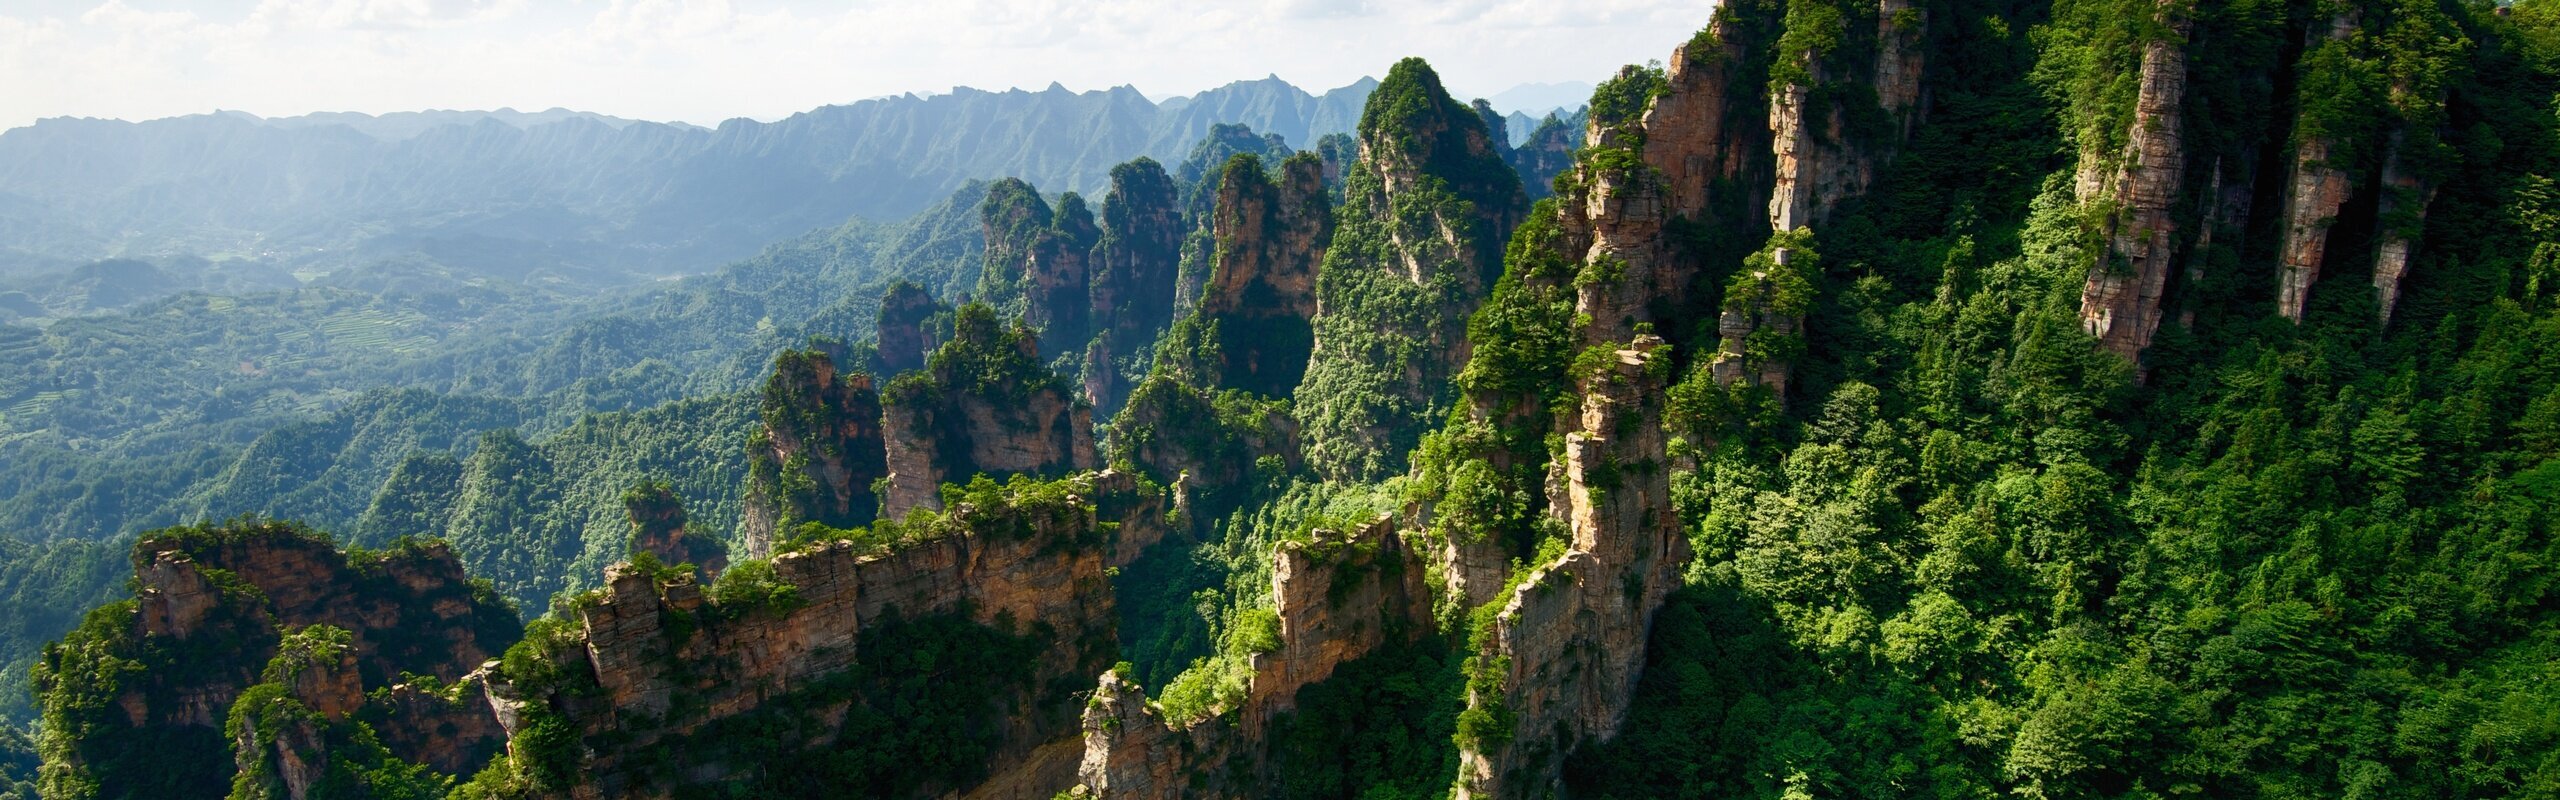 14-Day China Natural Wonders Discovery